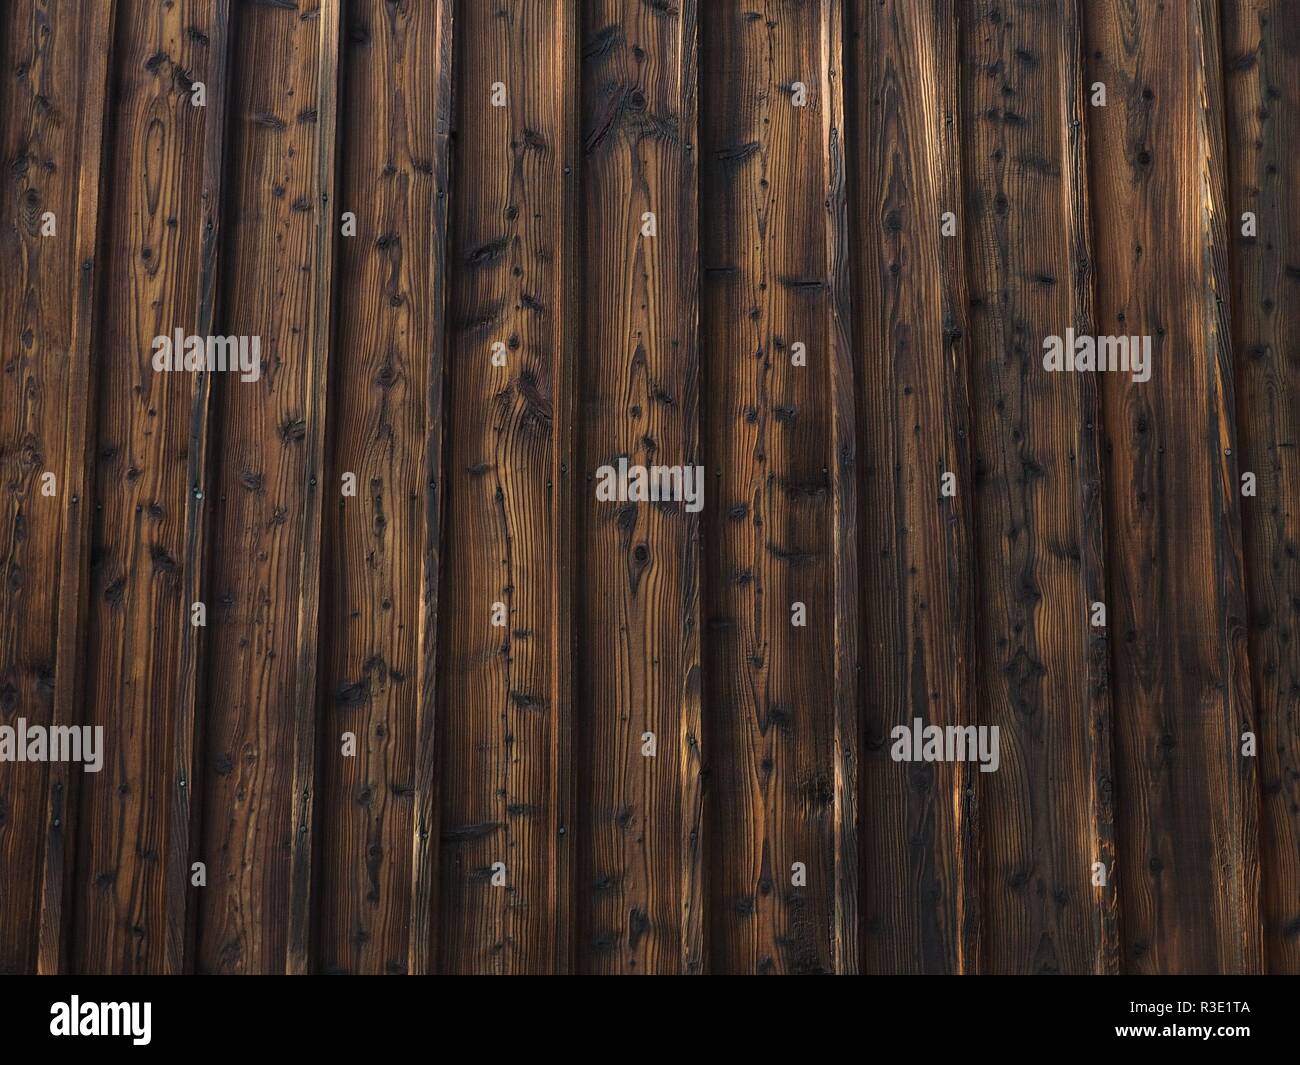 An old wooden building wall with a lot of knots Stock Photo